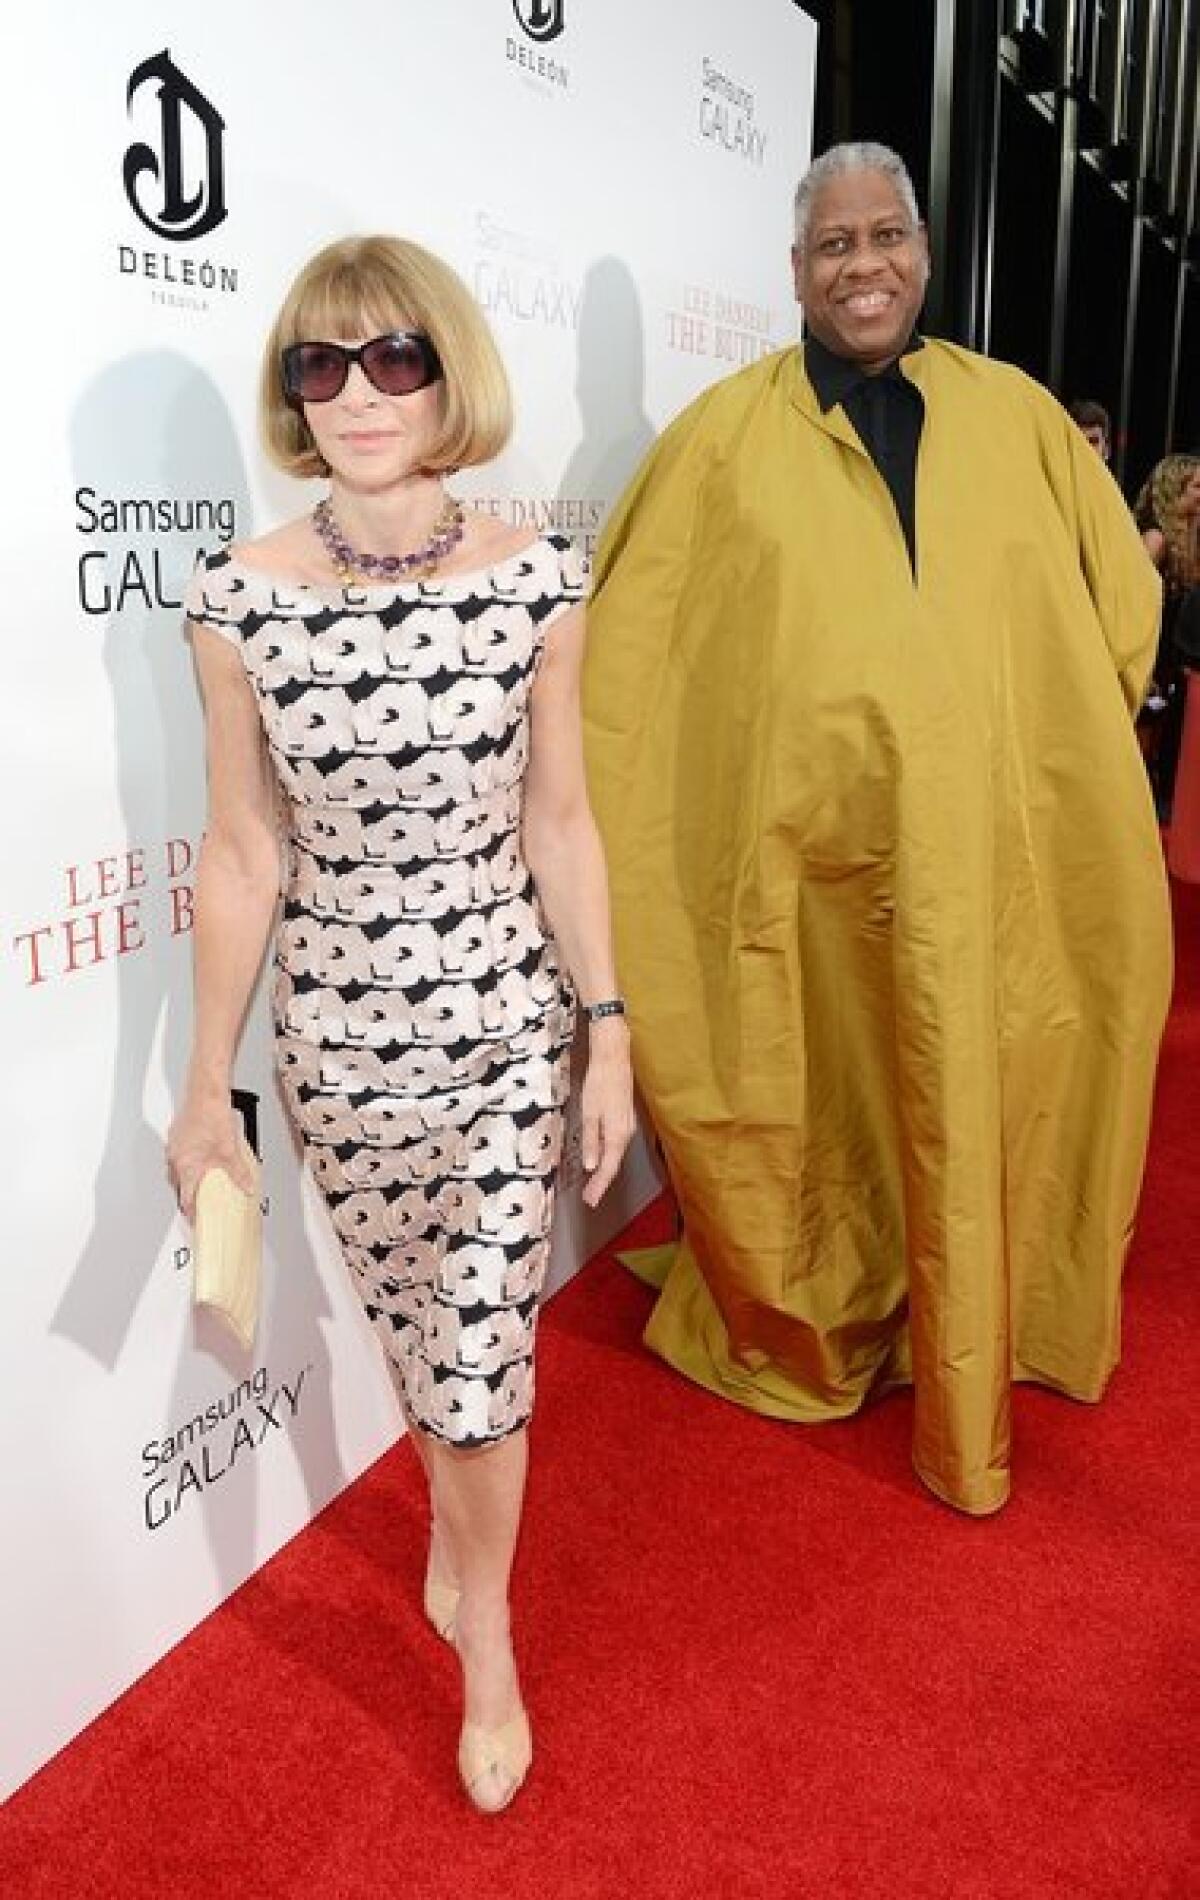 Vogue Editor in Chief Anna Wintour and Andre Leon Talley attend the New York premiere of Lee Daniels' "The Butler."